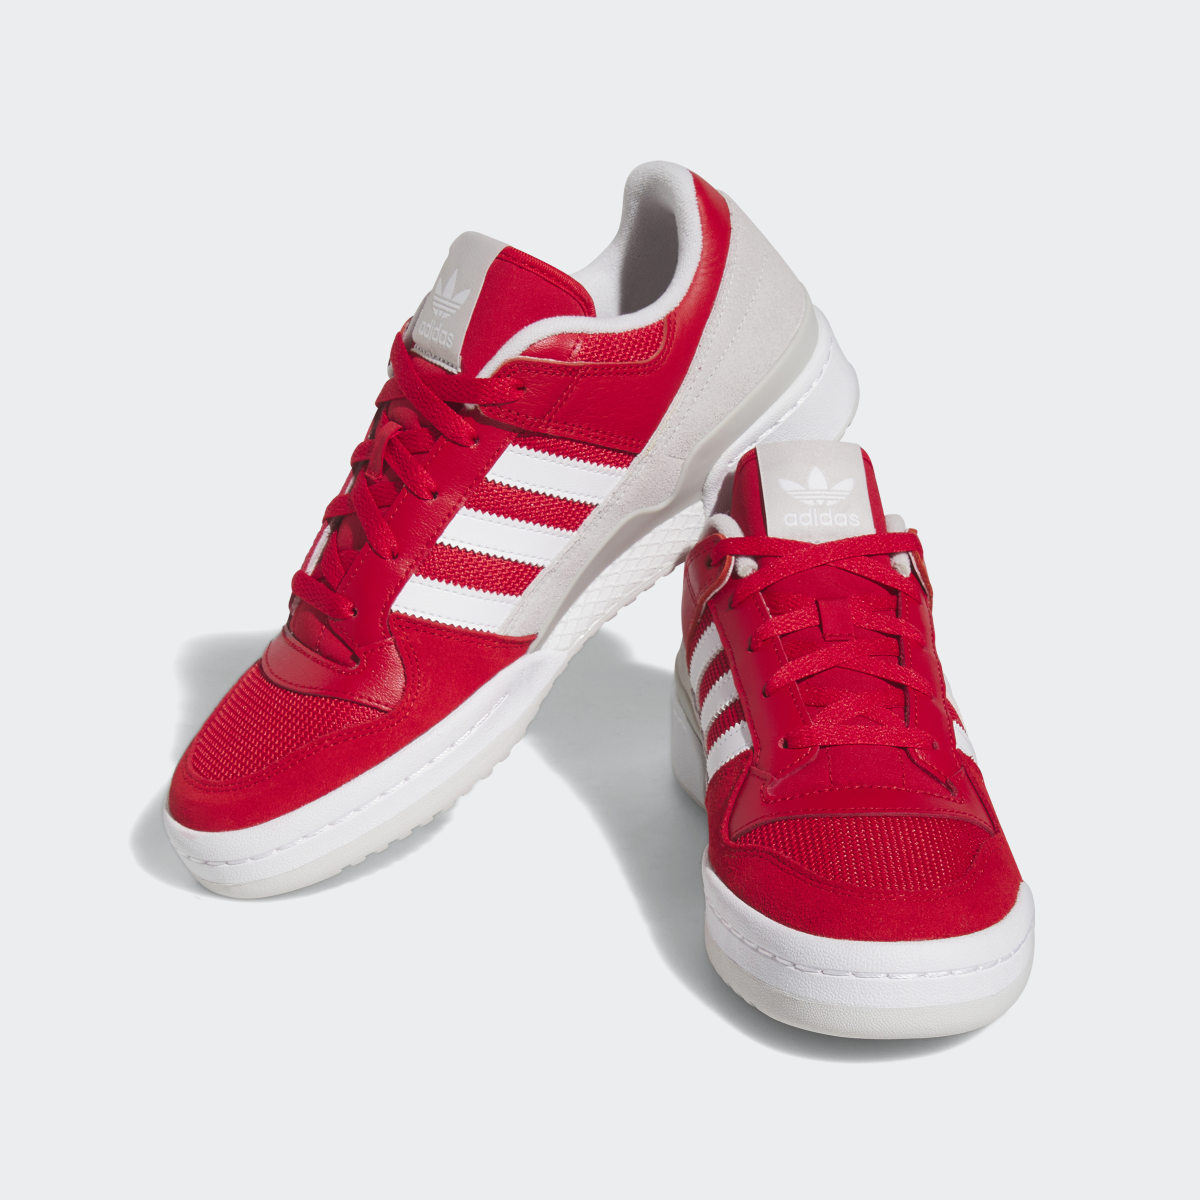 Adidas Forum Low Classic Shoes. 5